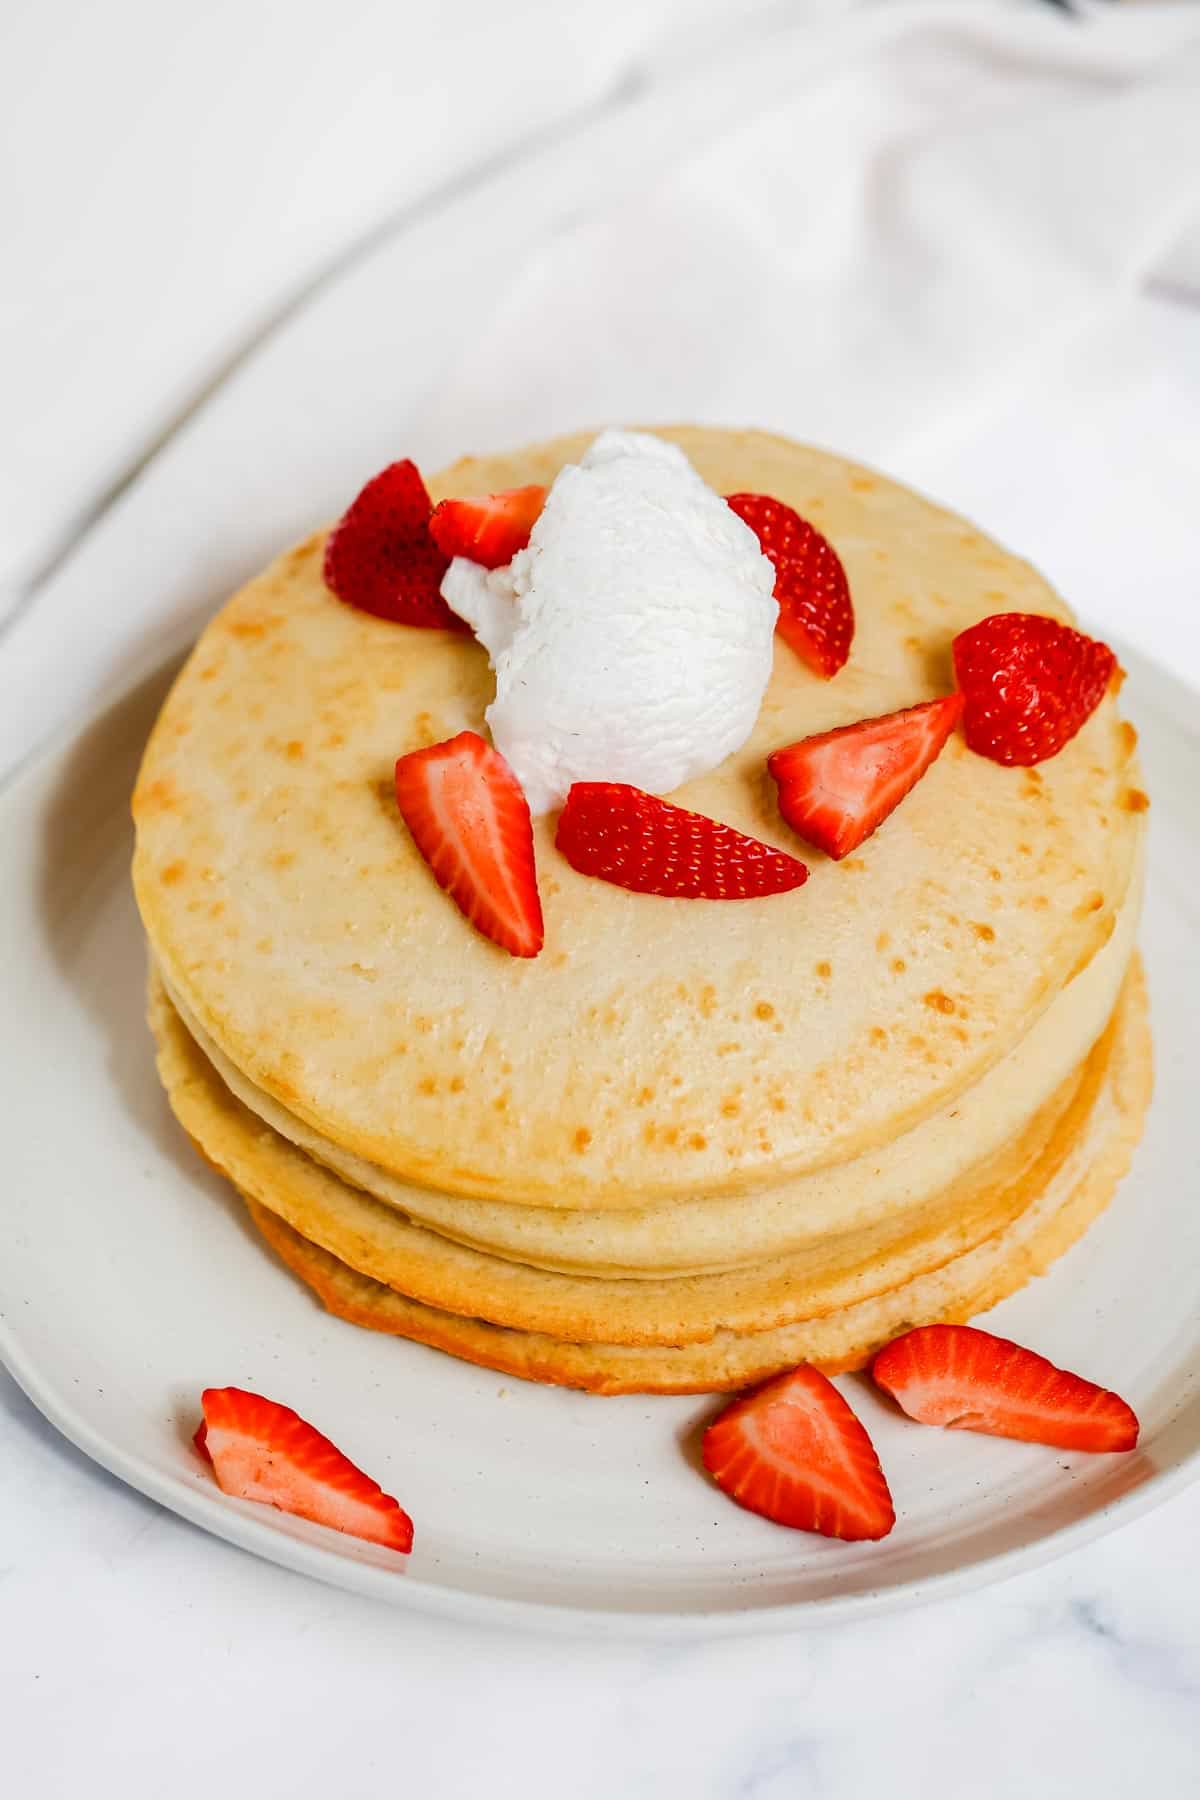 Pancakes topped with strawberries and whipped cream.